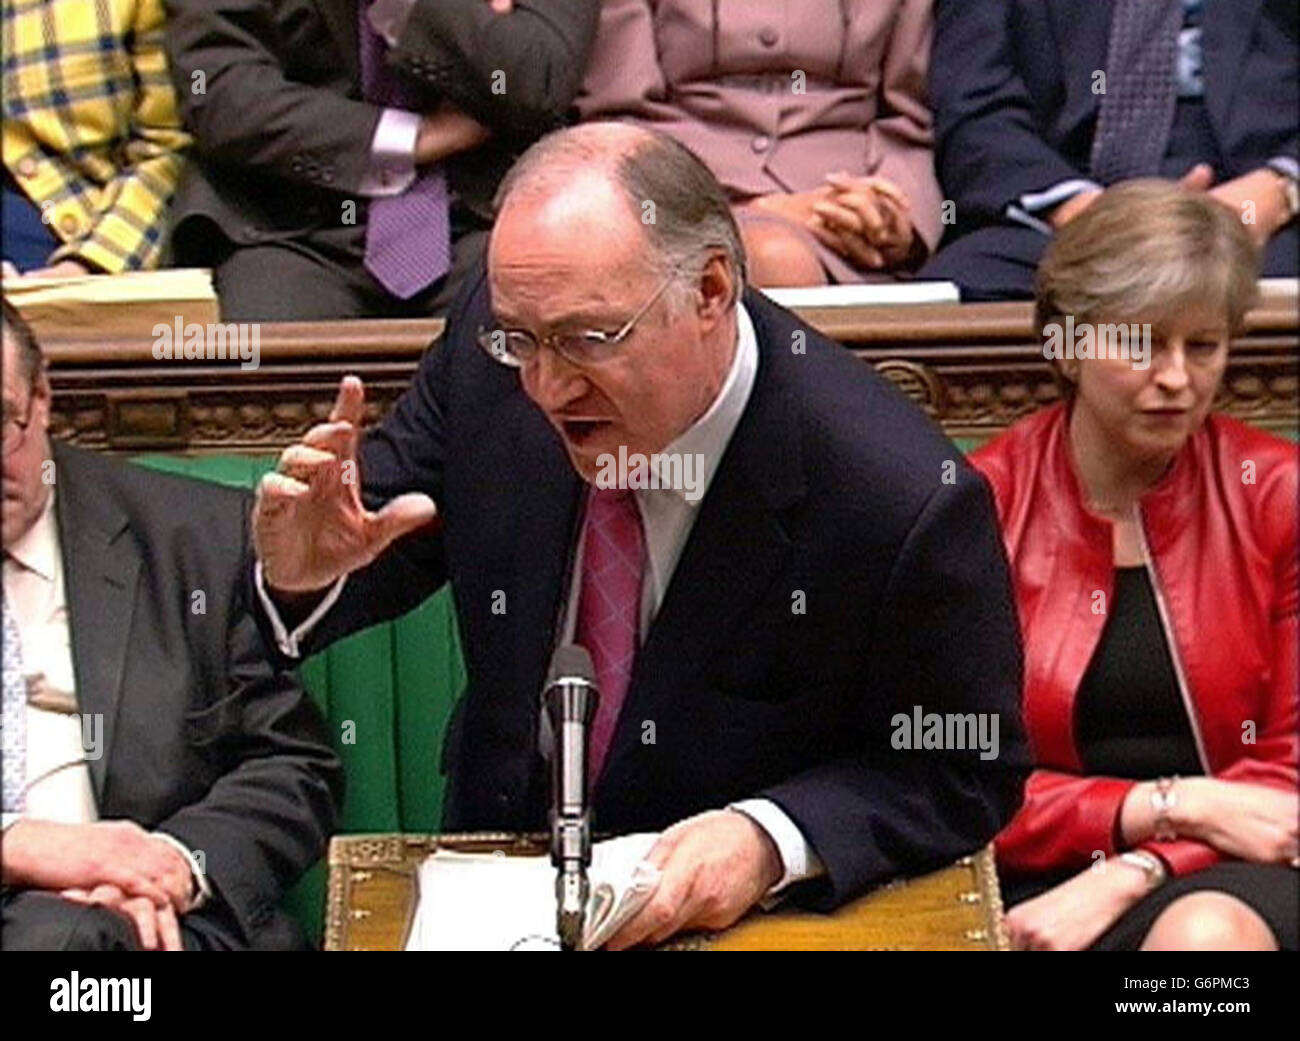 Leader of the Conservative Party, Michael Howard, questioning Prime Minister Tony Blair during his regular weekly Question Time in the House of Commons, London. Mr Howard was among MP's who challenged the Prime Minister ahead of the formal publication of the Hutton report into the circumstances surrounding the death of Government weapons expert Dr David Kelly. Stock Photo